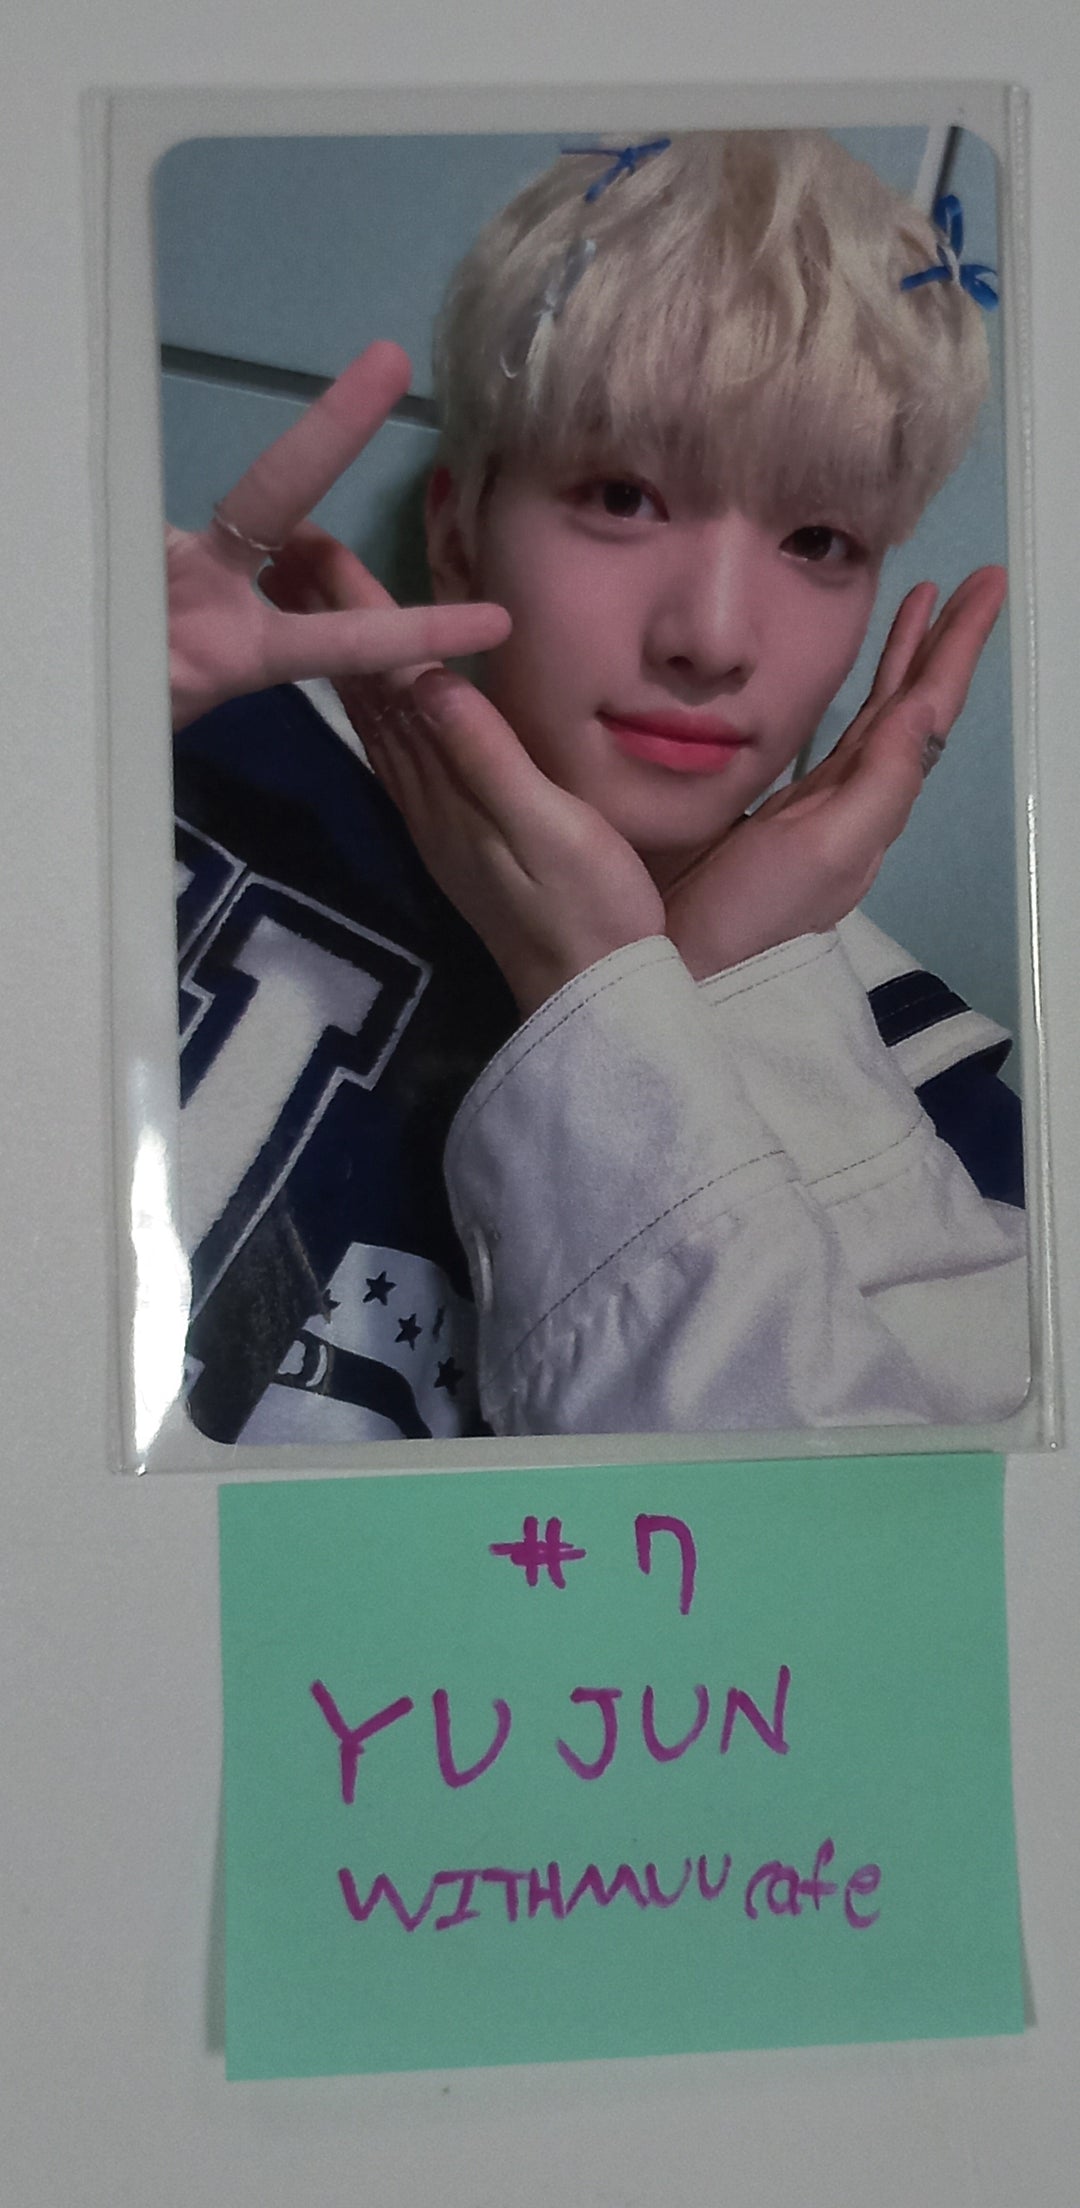 Xikers "HOUSE OF TRICKY : Doorbell Ringing" - Withmuu Cafe Event Photocard [23.10.12]